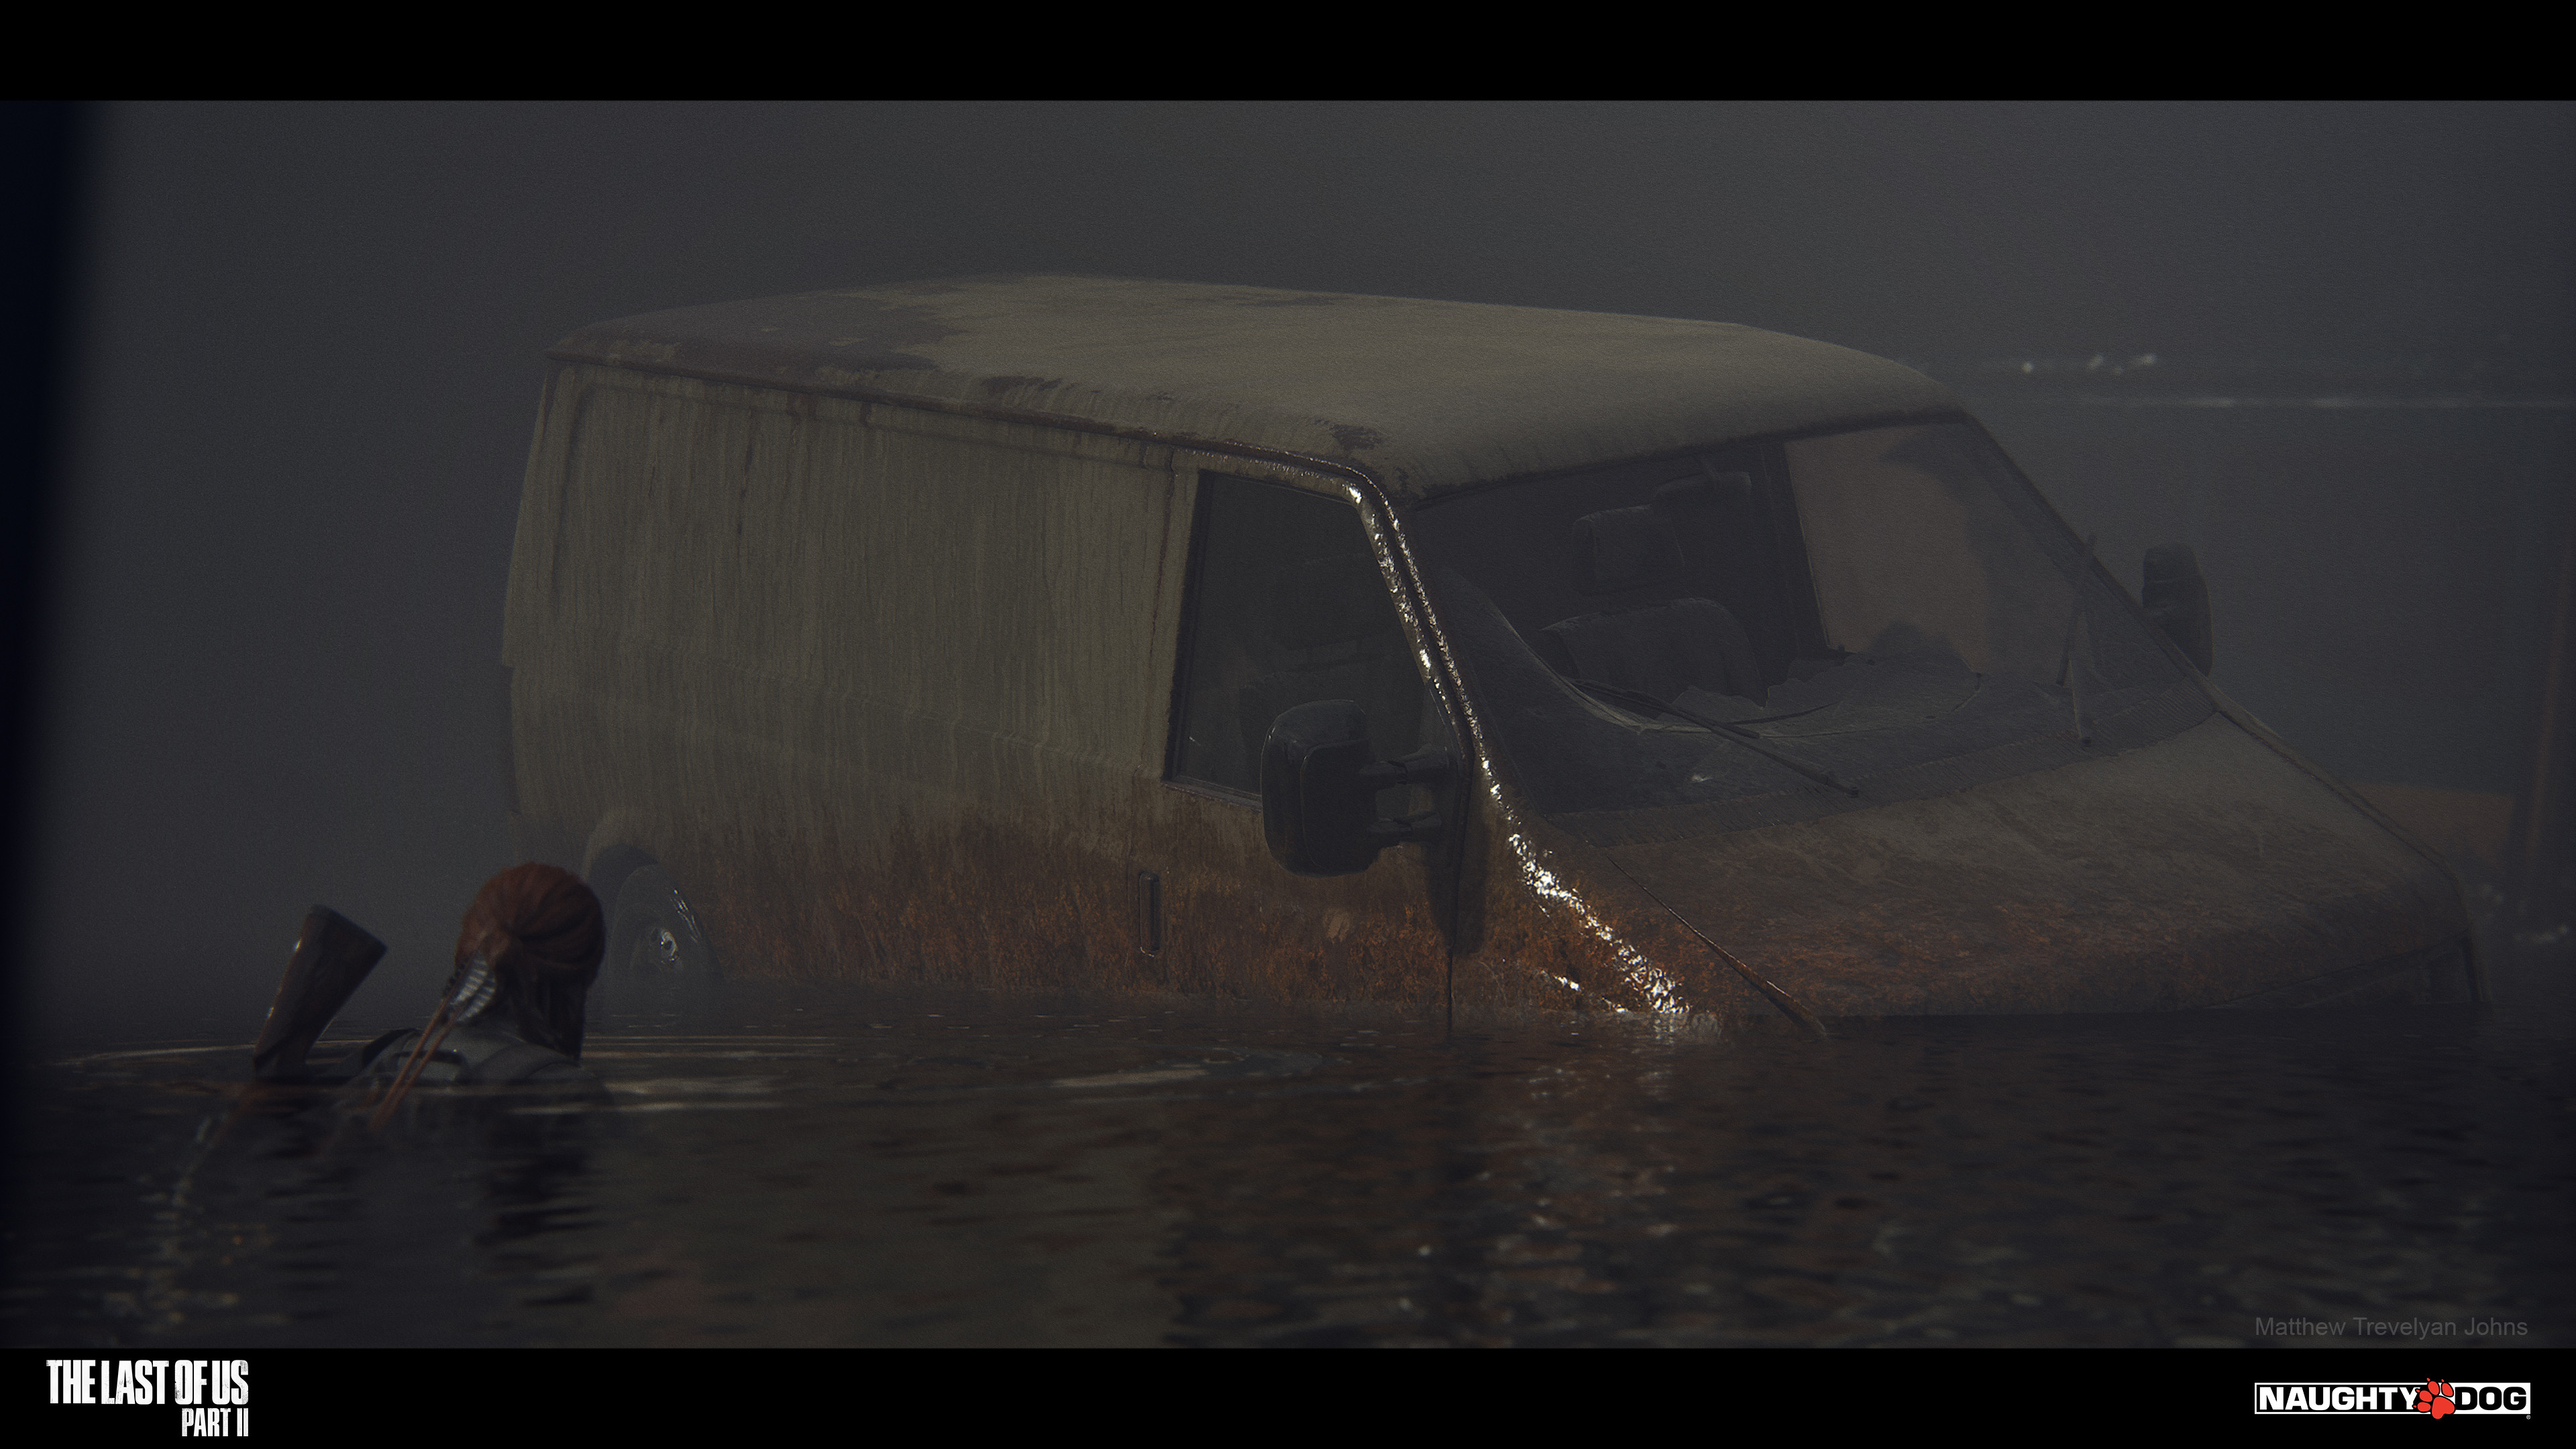 An example shot from a test scene of mine, we also had versions of the submerged vehicles for dry levels, where rain streaks were replaced with a dirtier, dusty treatment